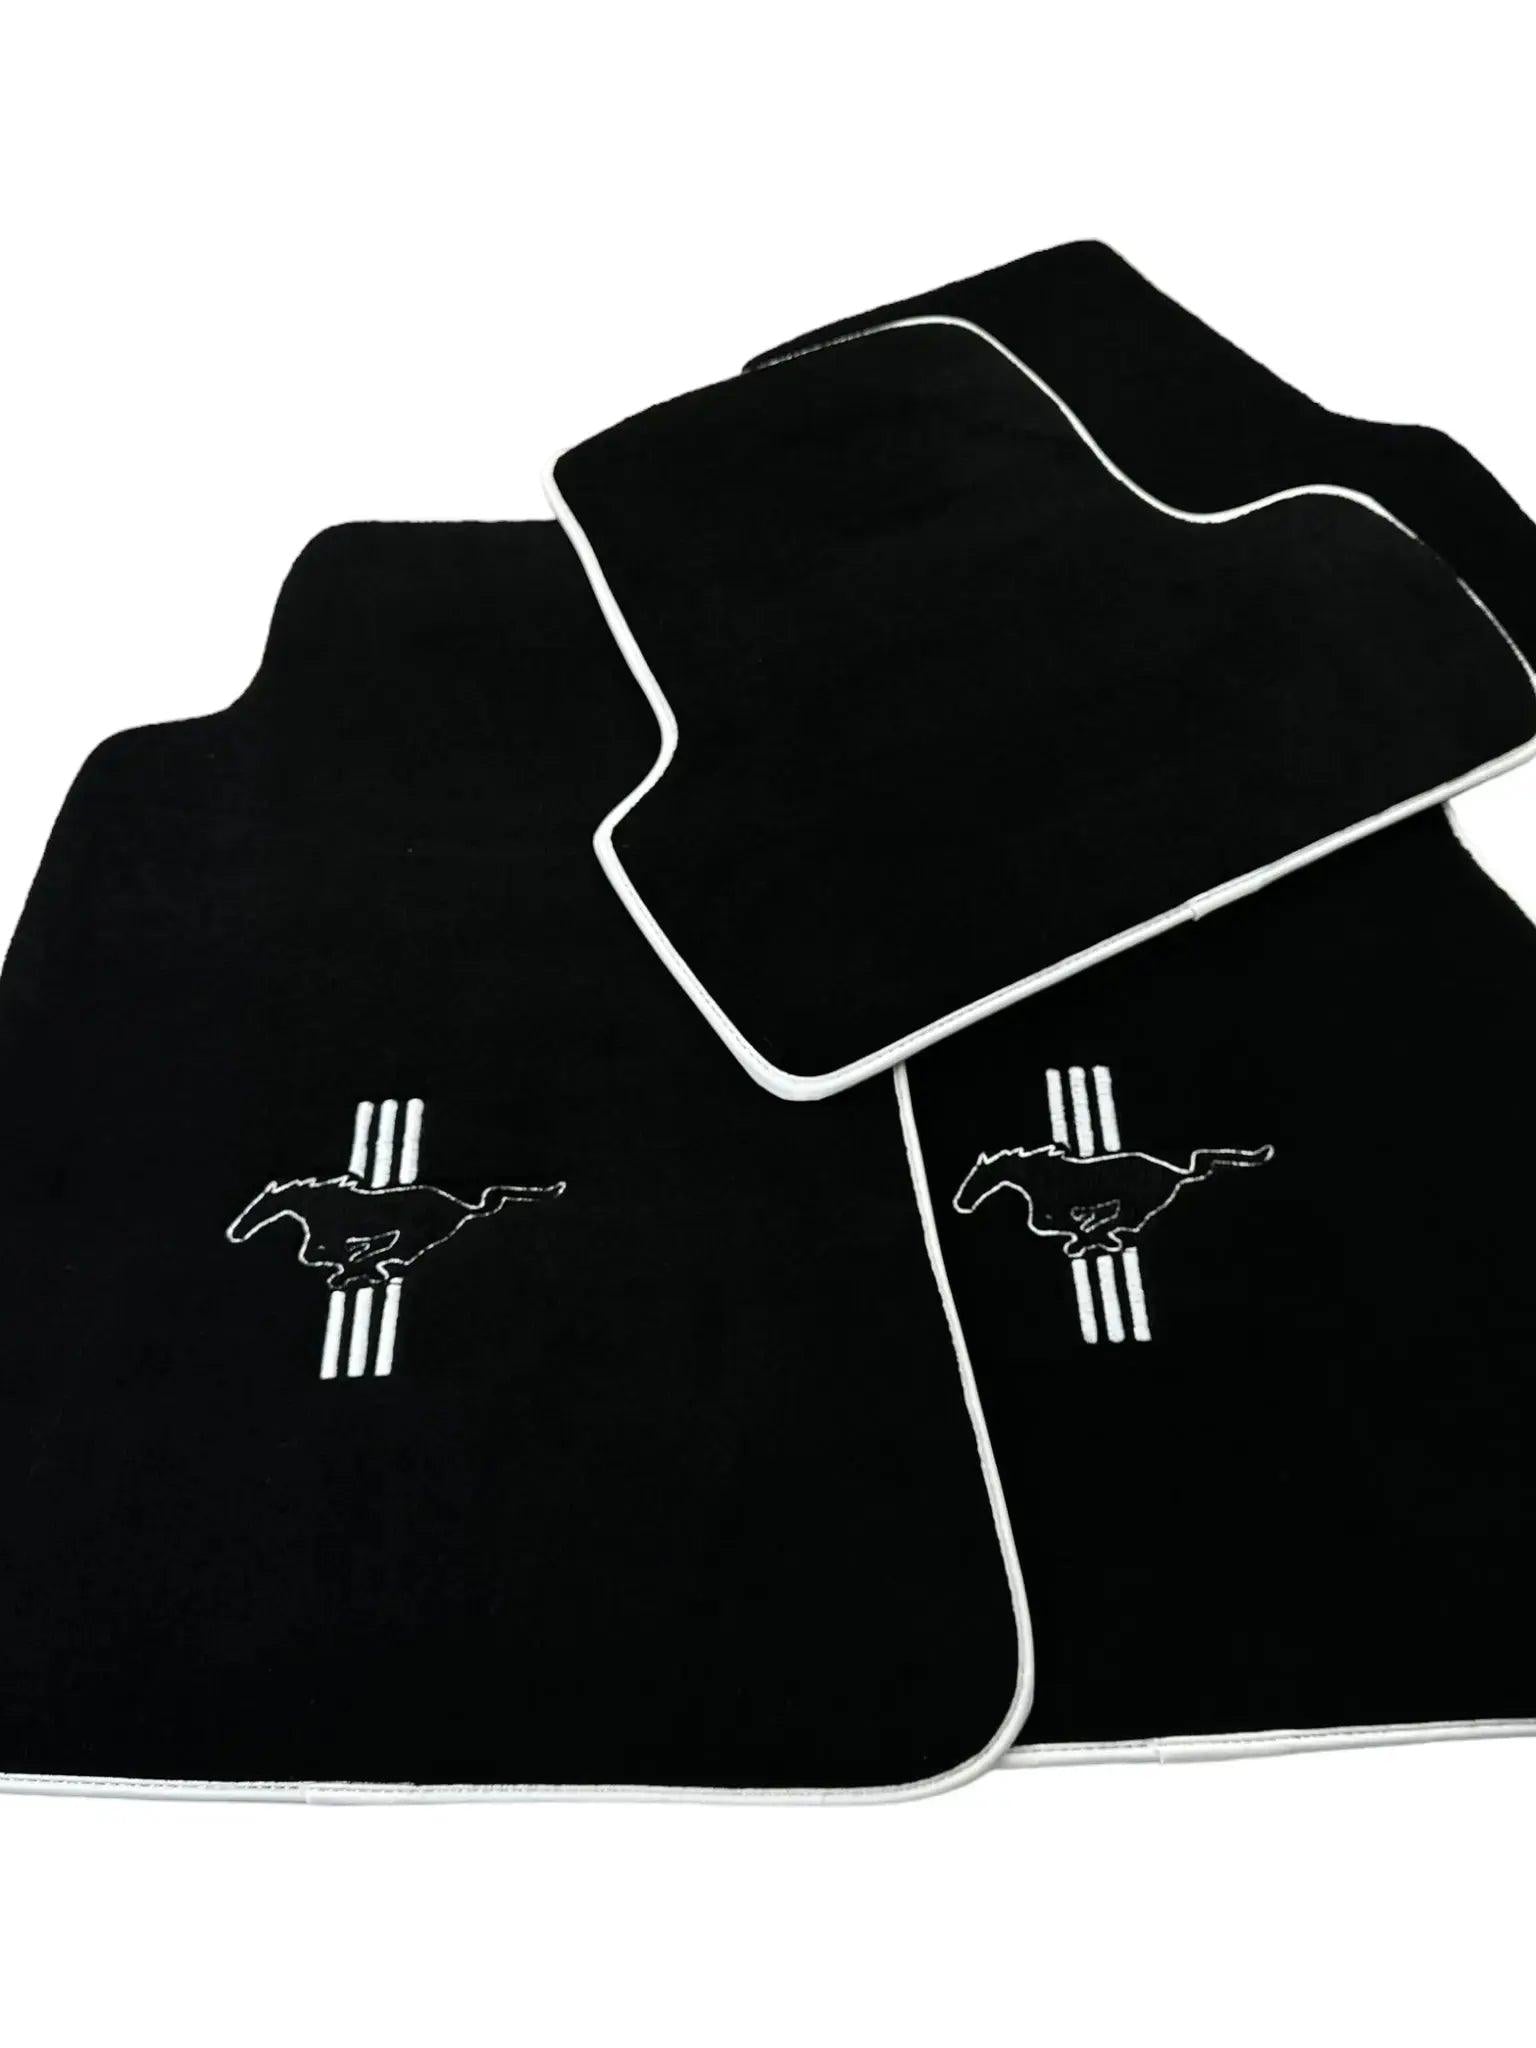 Black Floor Mats with White Trim For Ford Mustang V (2004-2010) With Pony - AutoWin